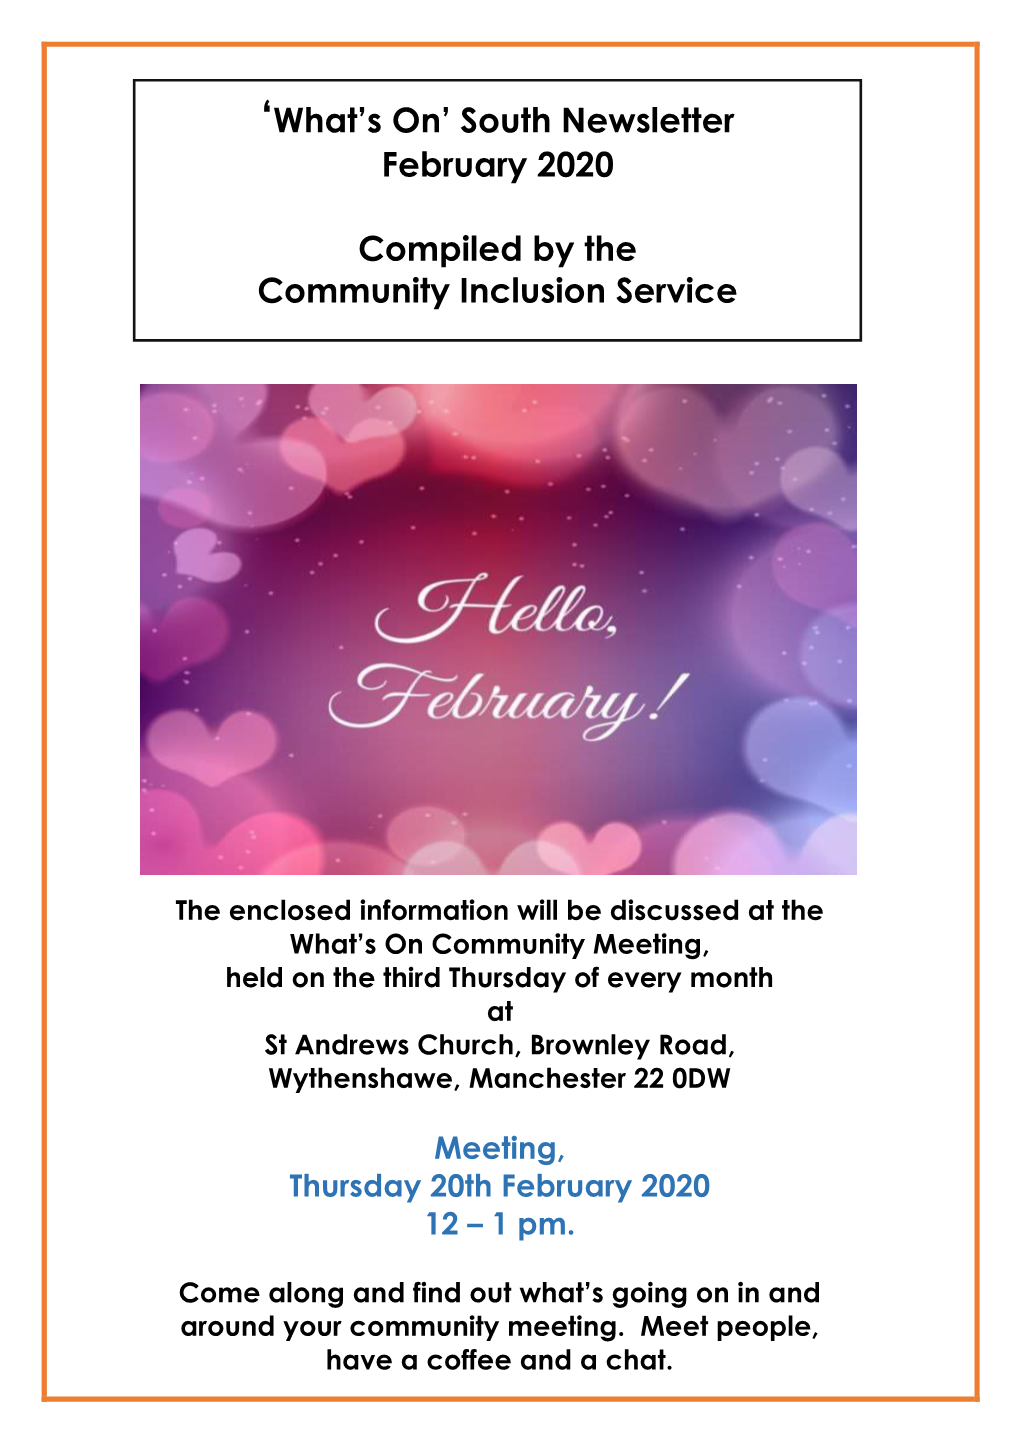 'What's On' South Newsletter February 2020 Compiled by the Community